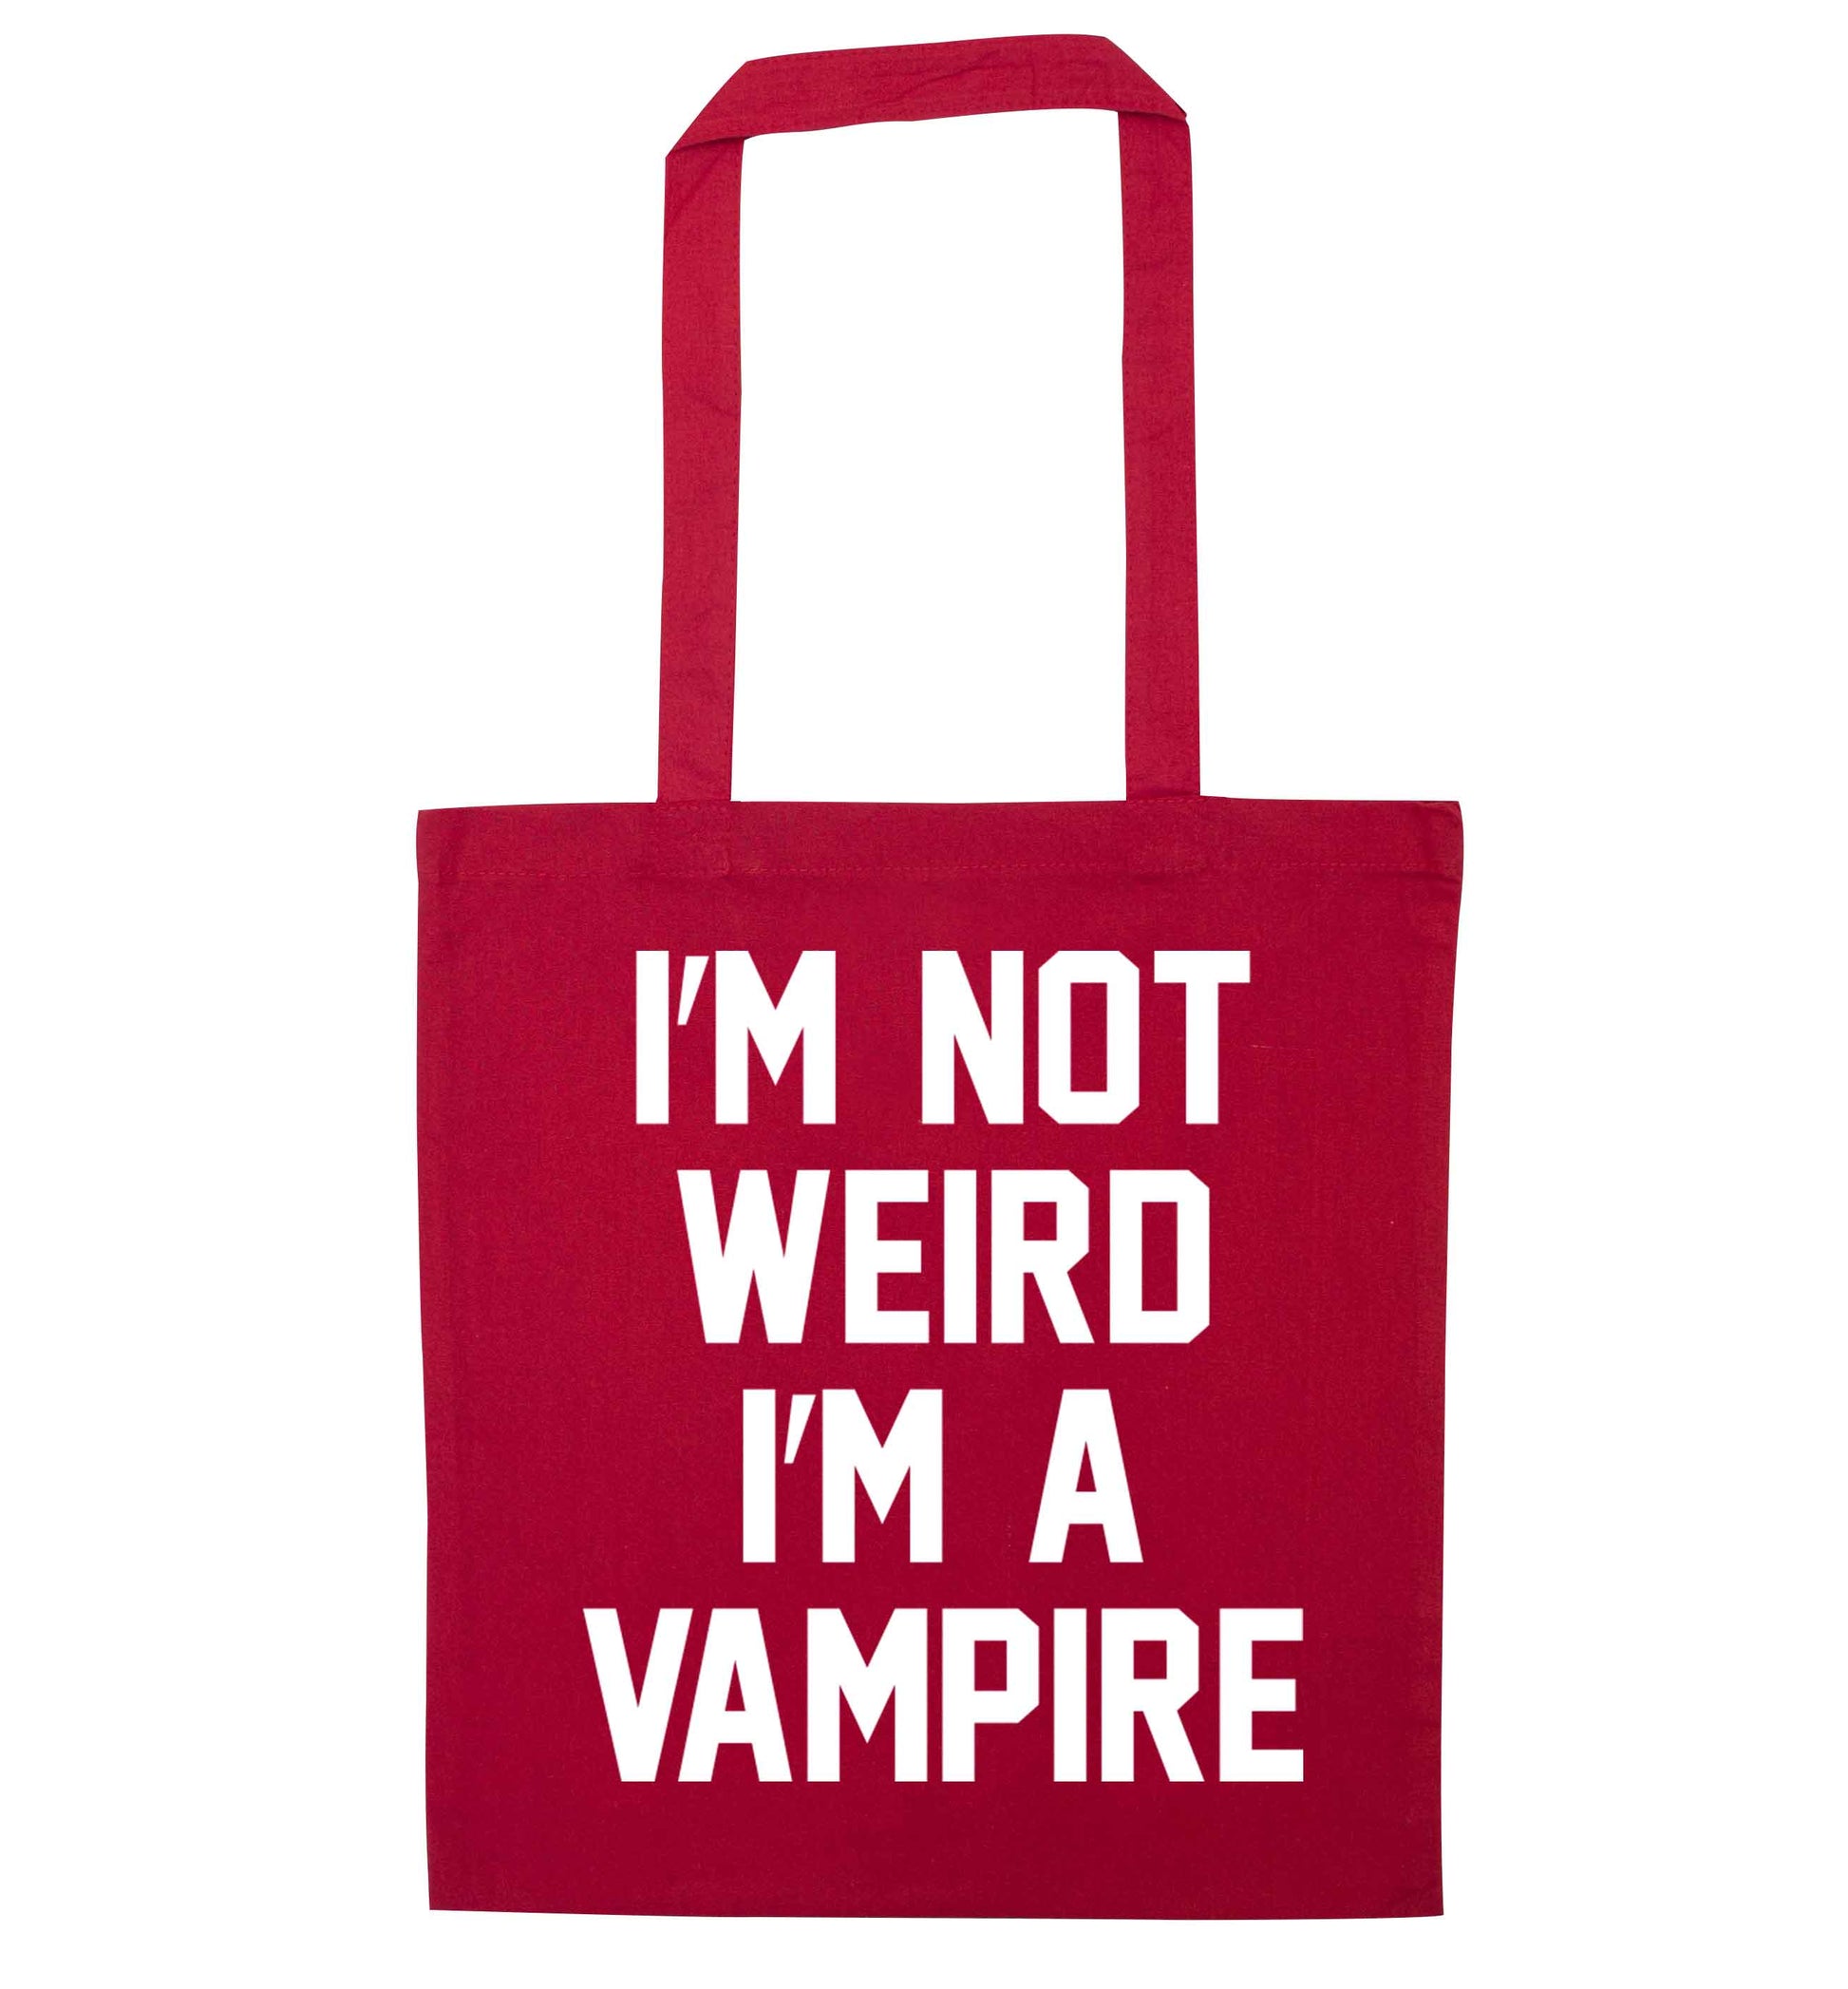 I'm not weird I'm a vampire red tote bag